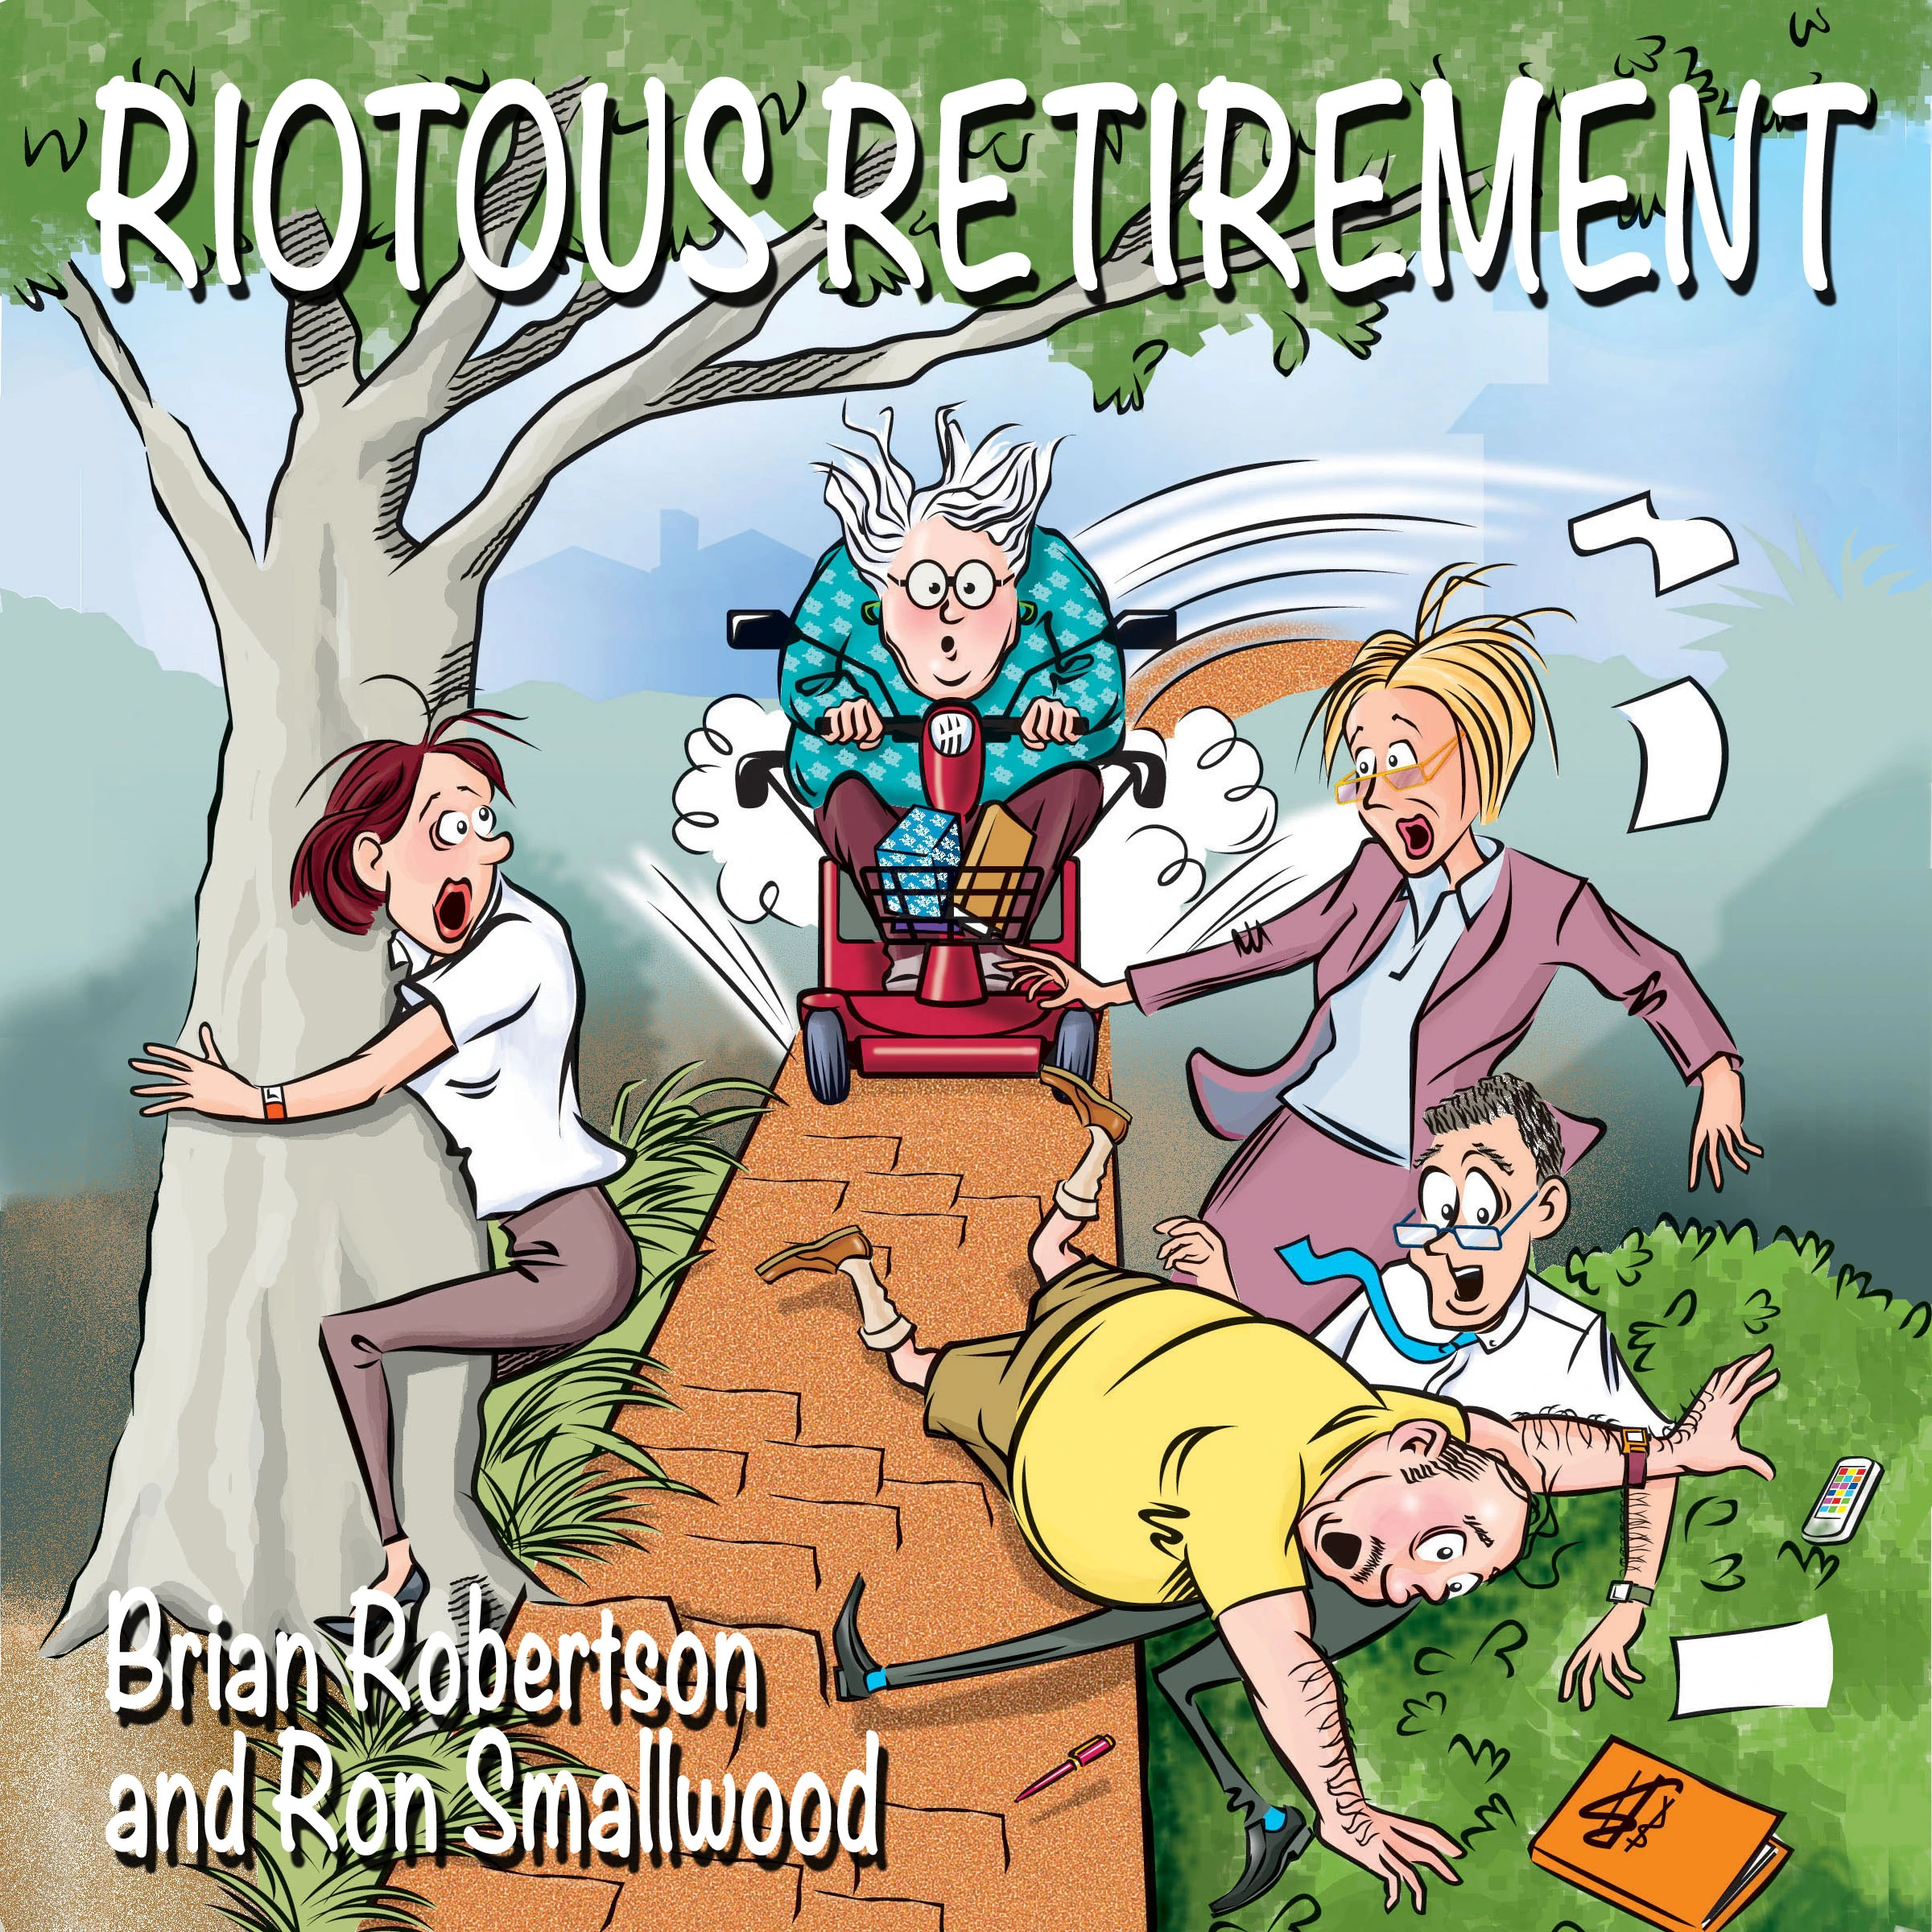 Riotous Retirement Audiobook by Brian Robertson and Ron Smallwood